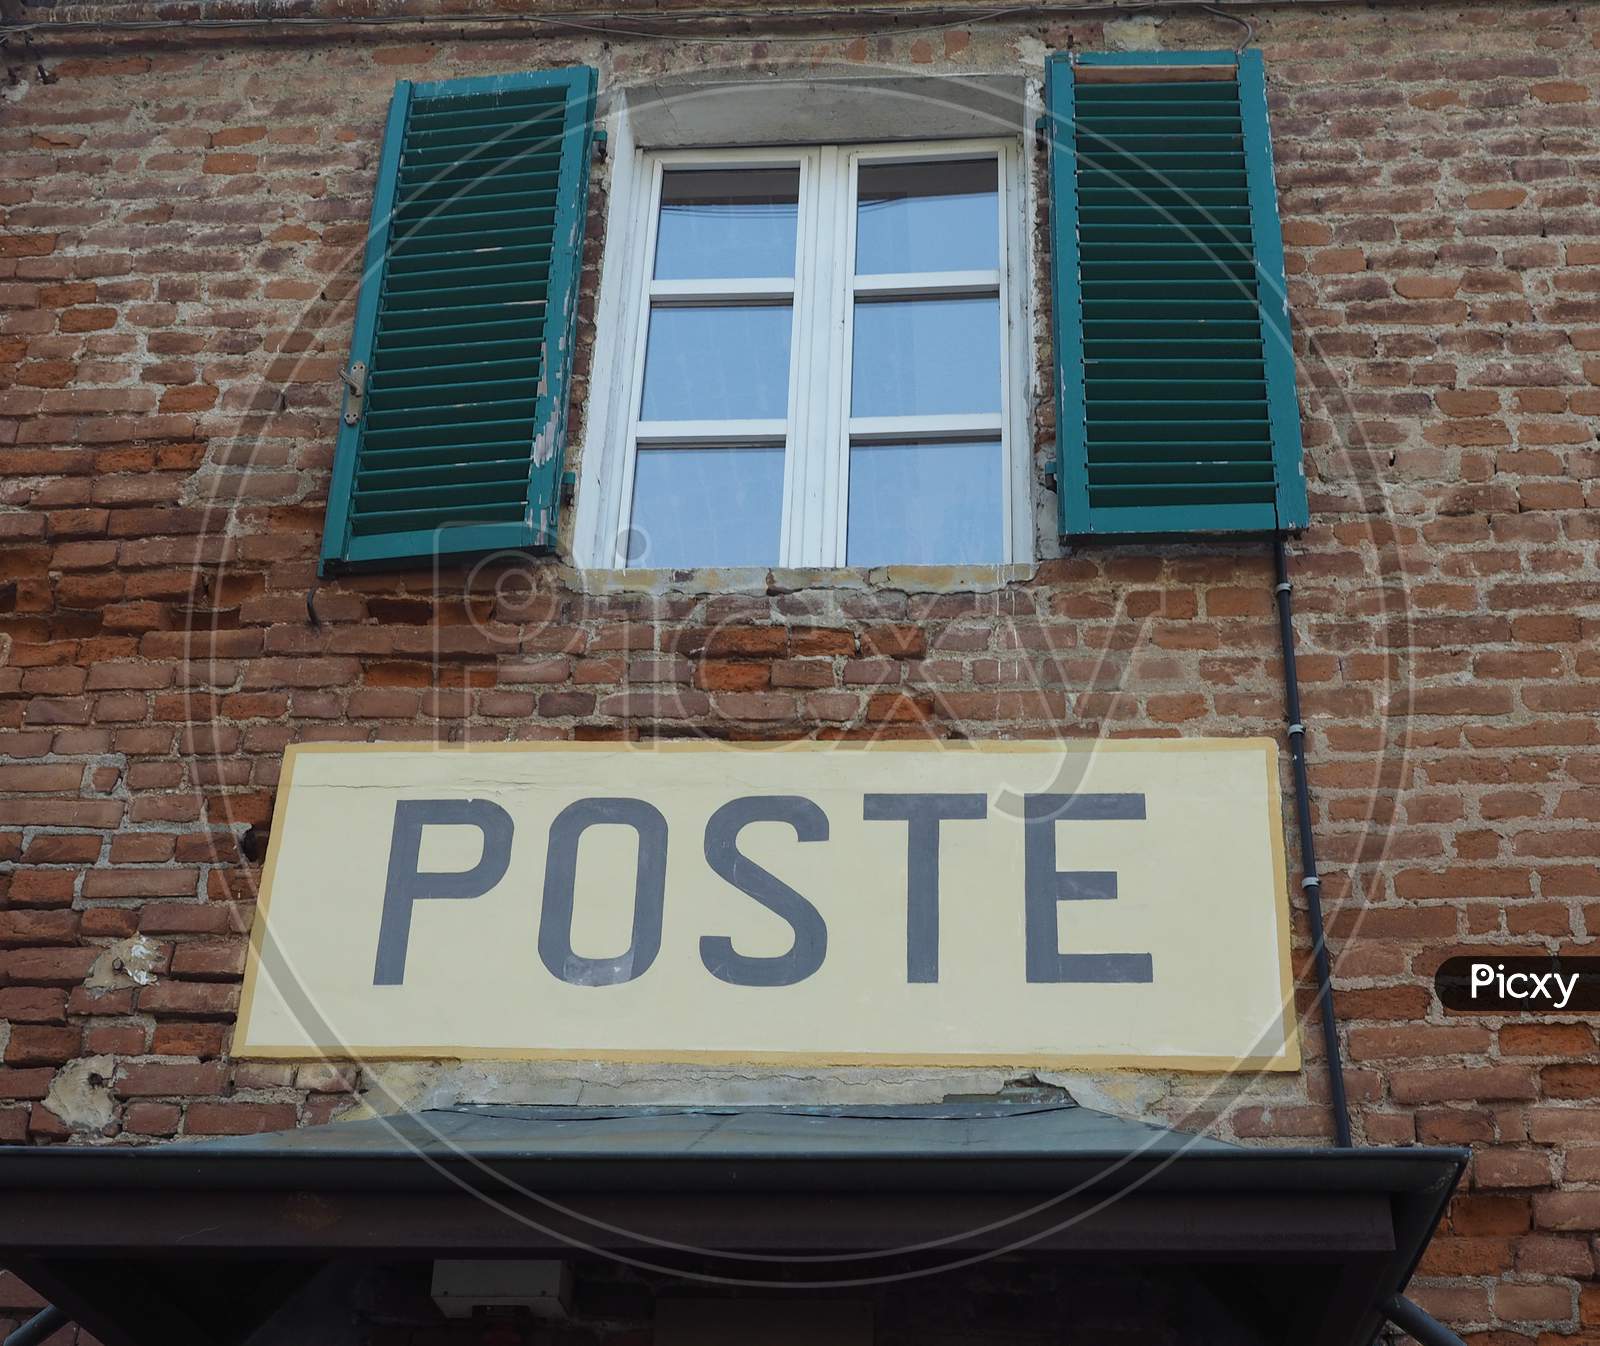 Poste (Post Office) Sign